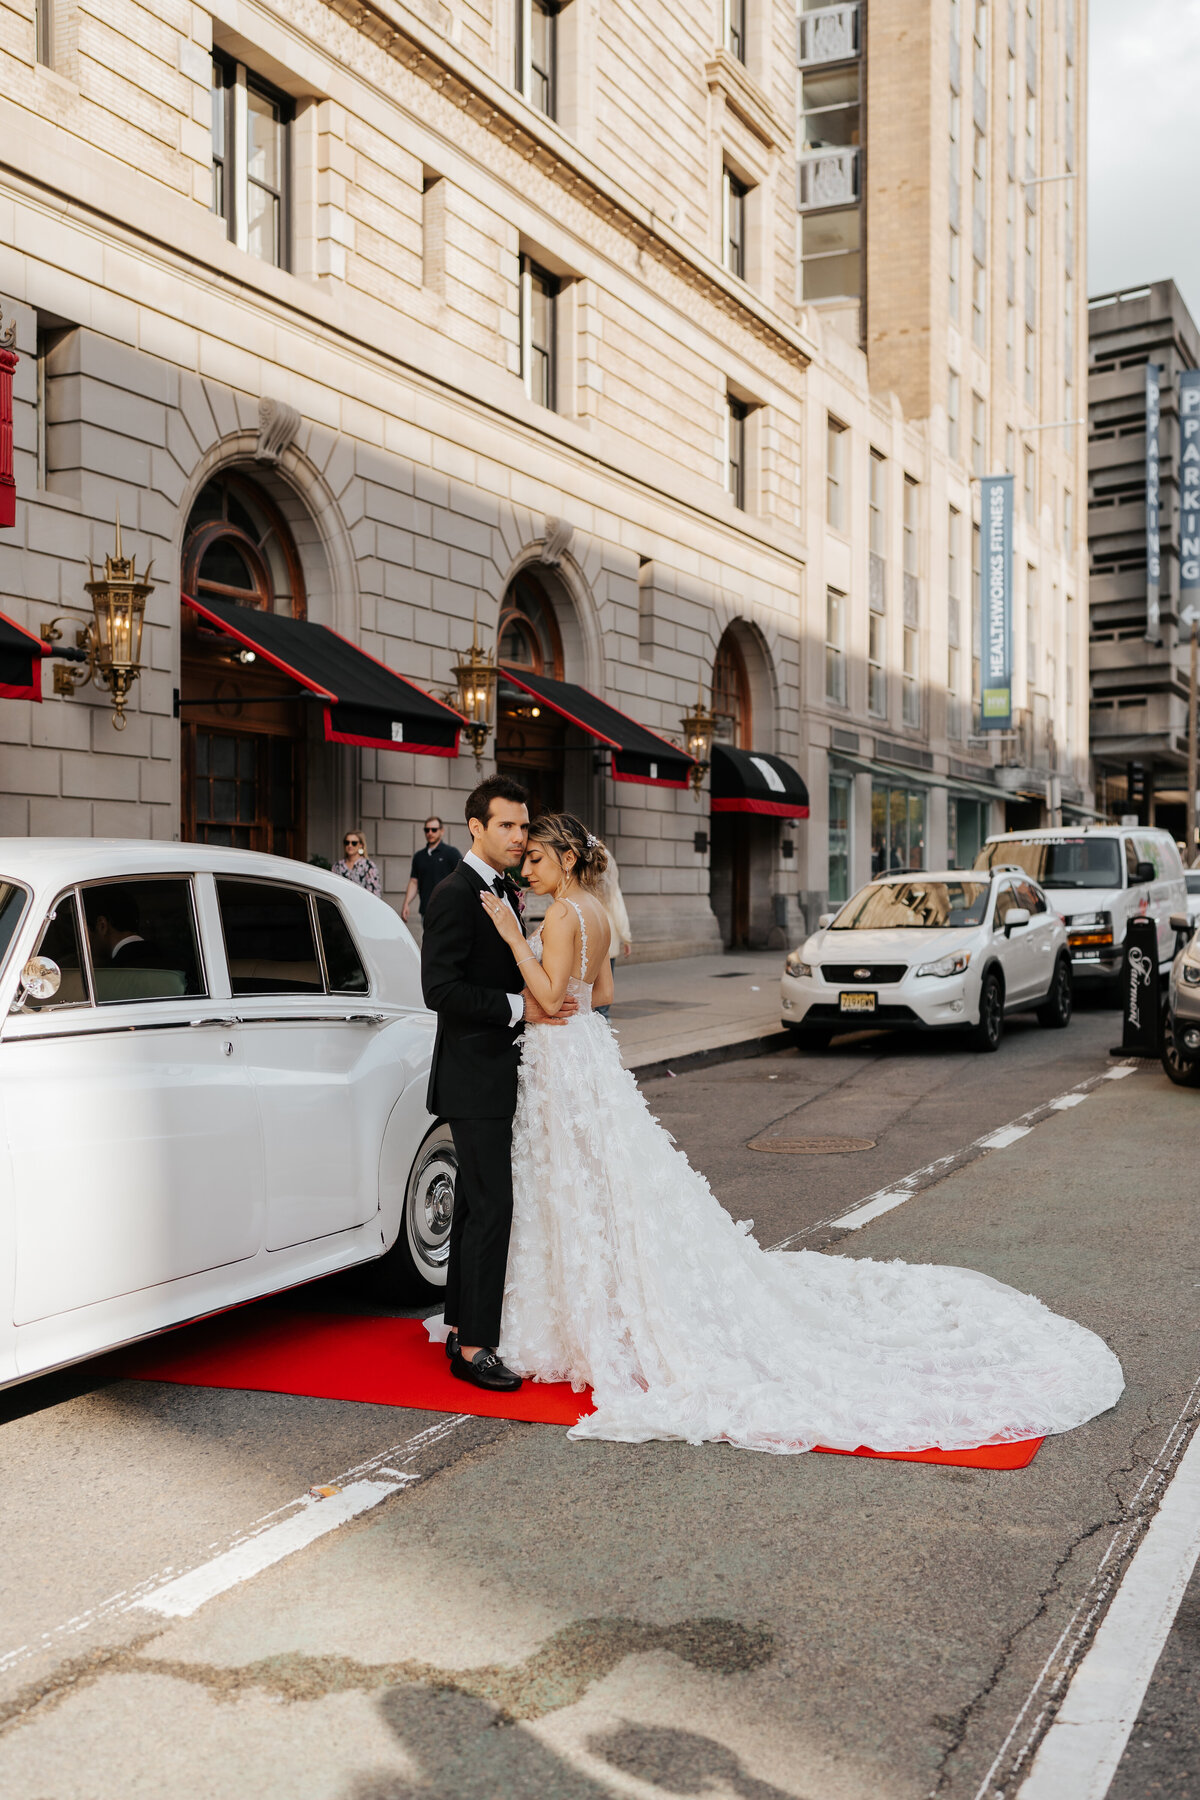 bride and groom embracing while leaning against old white car in the street